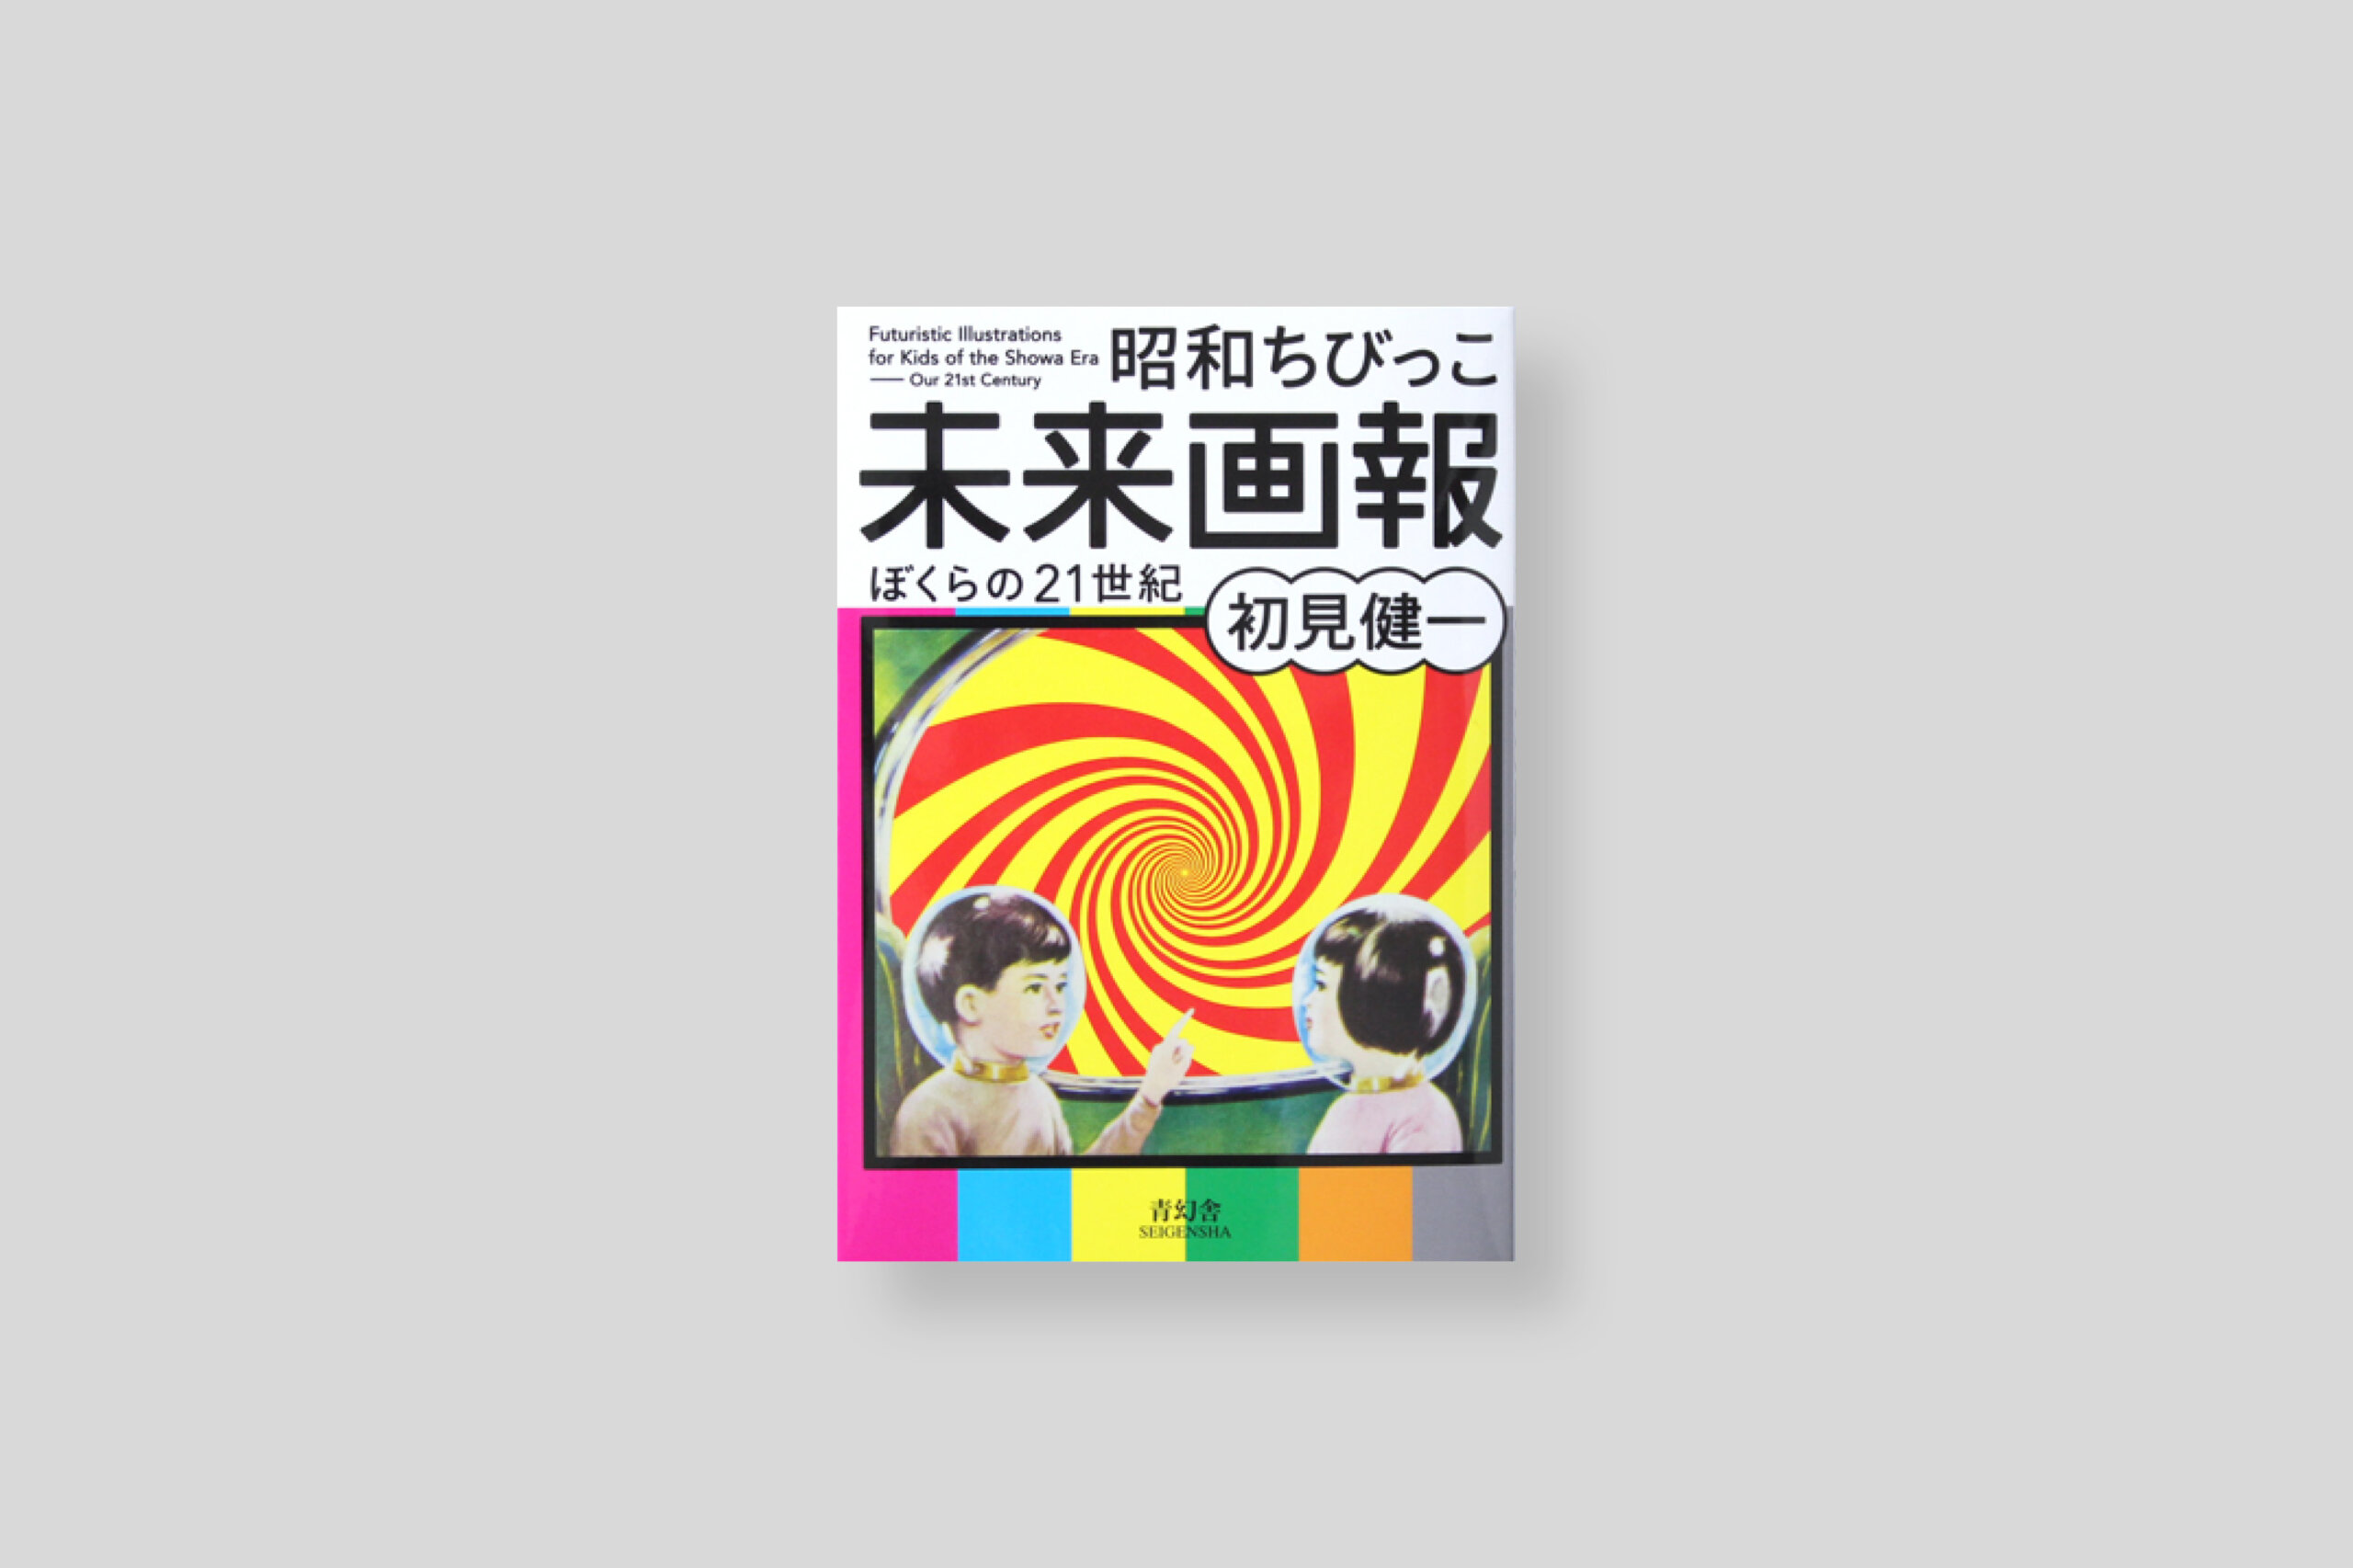 Dictionary Of Color Combinations Volume 2: Sanzo Wada: 9784861527722:  : Books